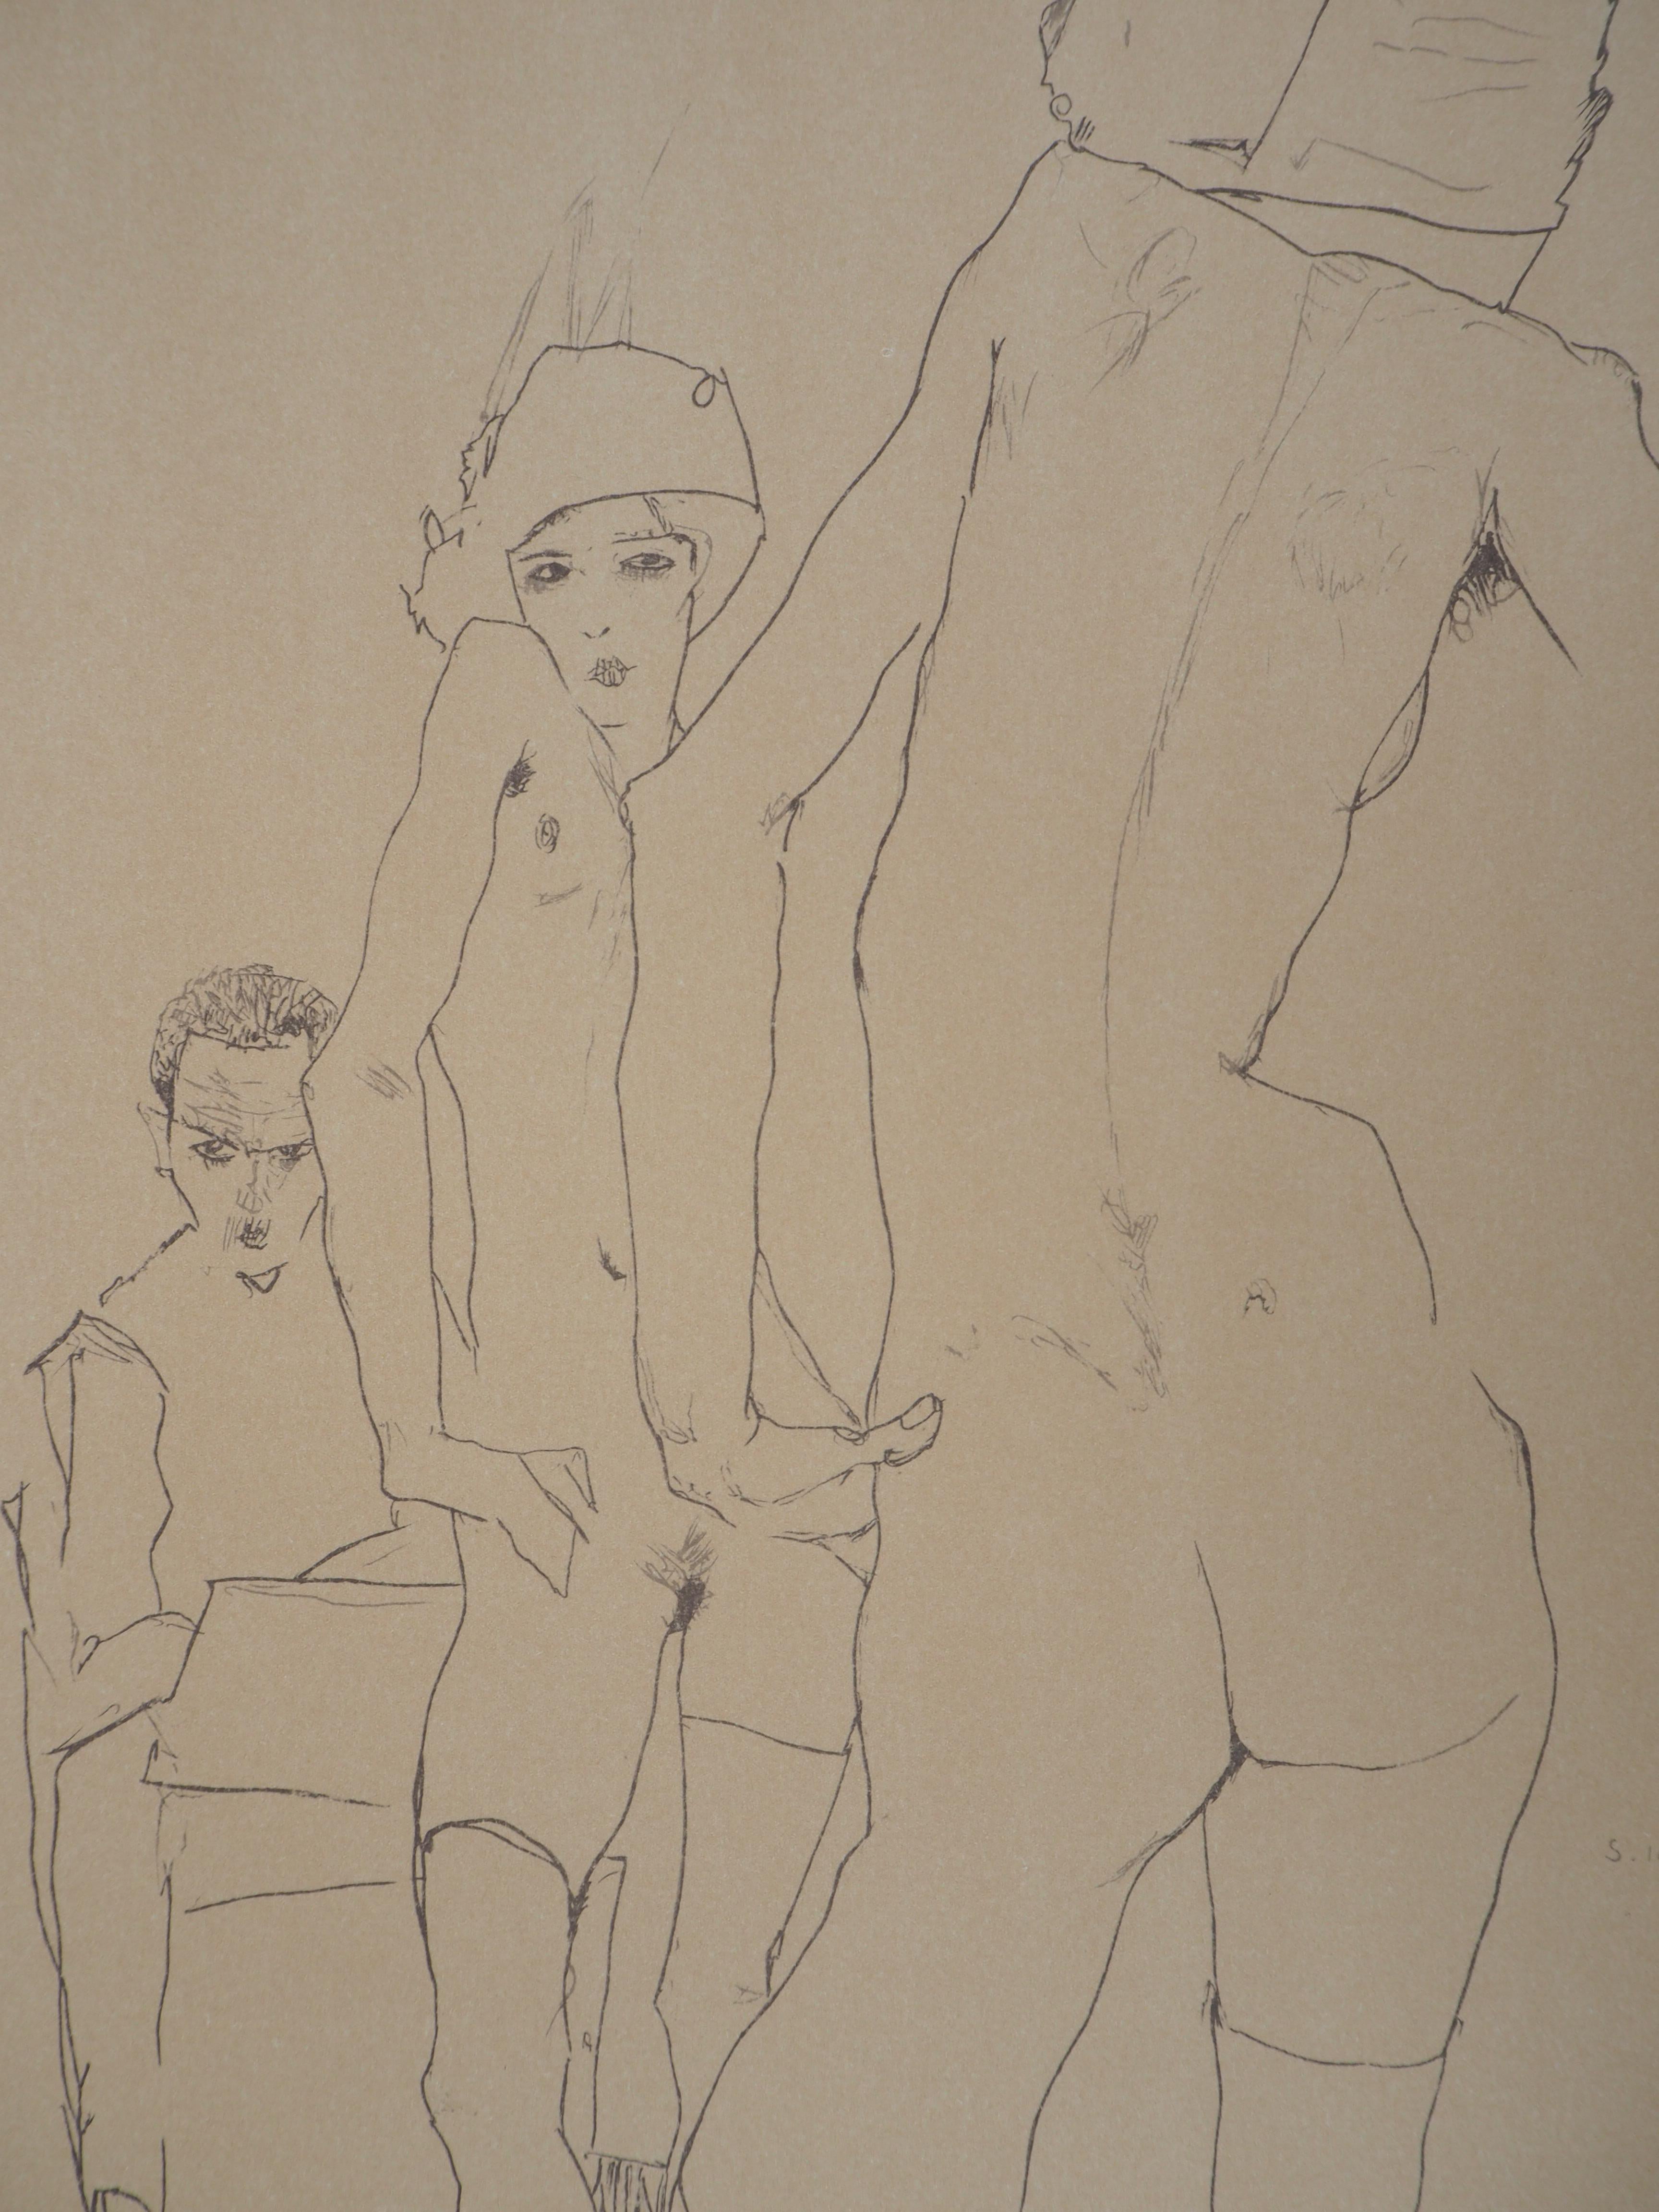 In the Miror - Lithograph (Kallir #D737) - Brown Figurative Print by (after) Egon Schiele